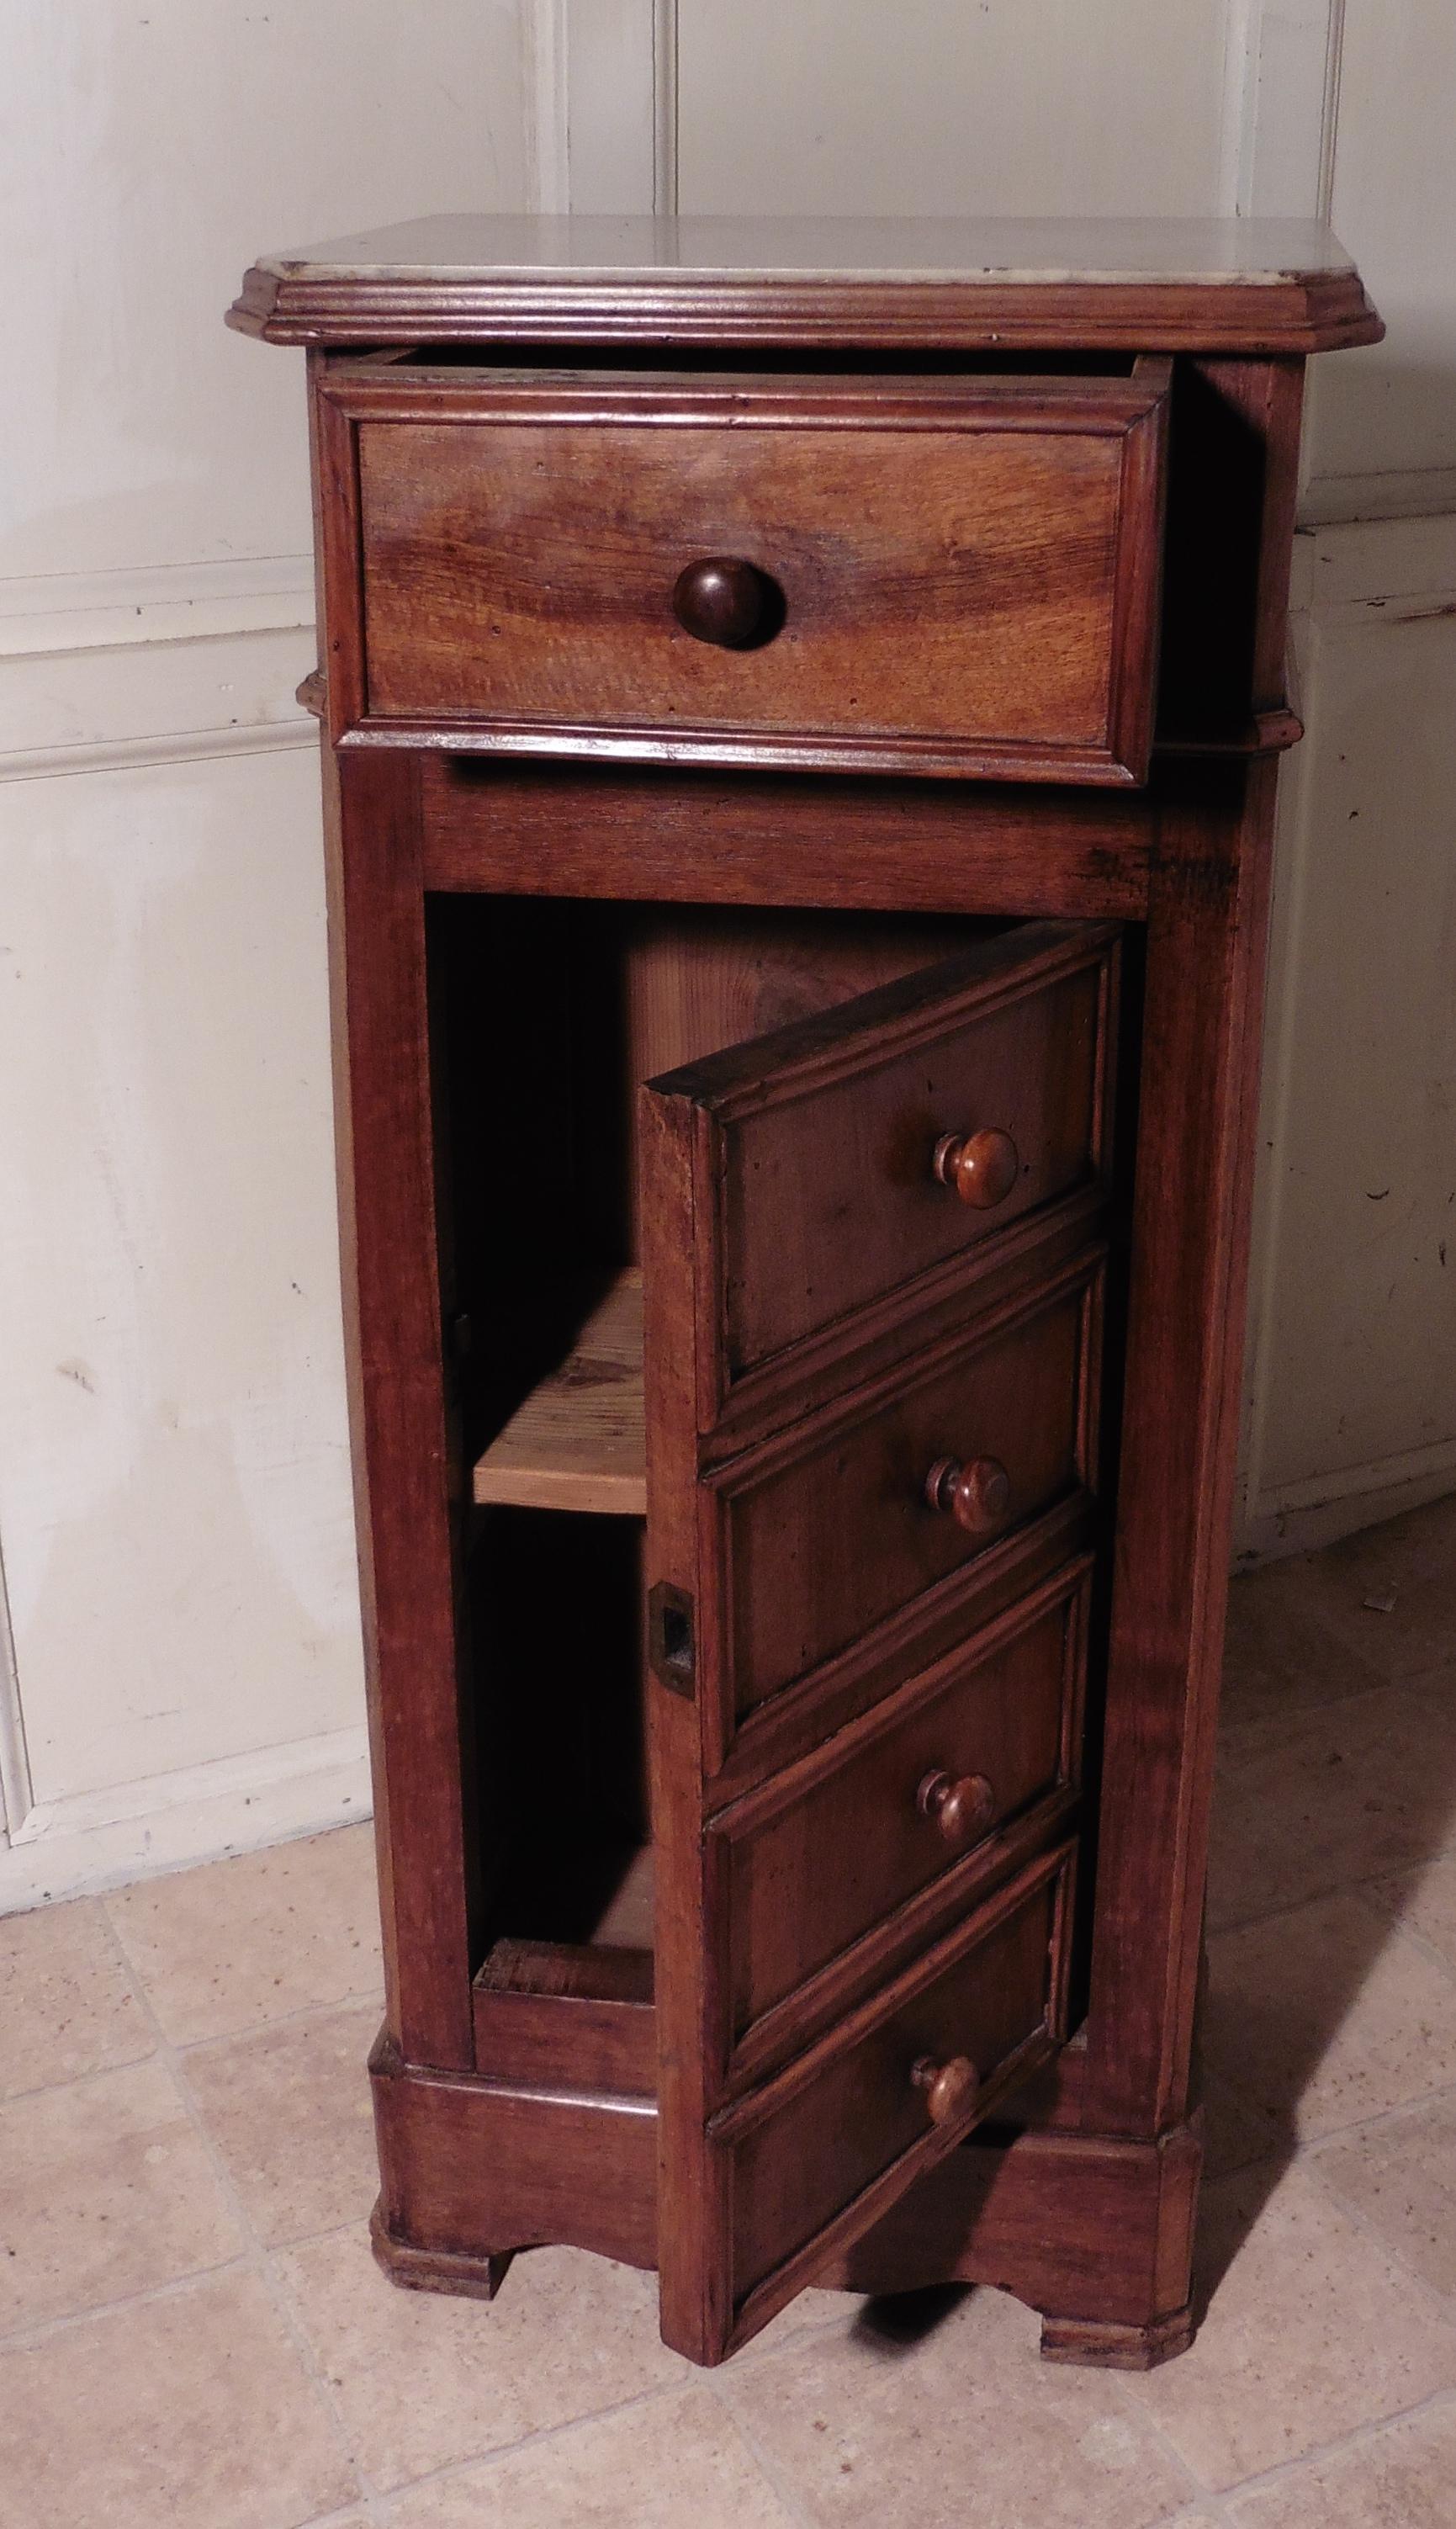 19th Century French Figured Walnut Bedside Chest of Drawers or Night Table   This piece is ma